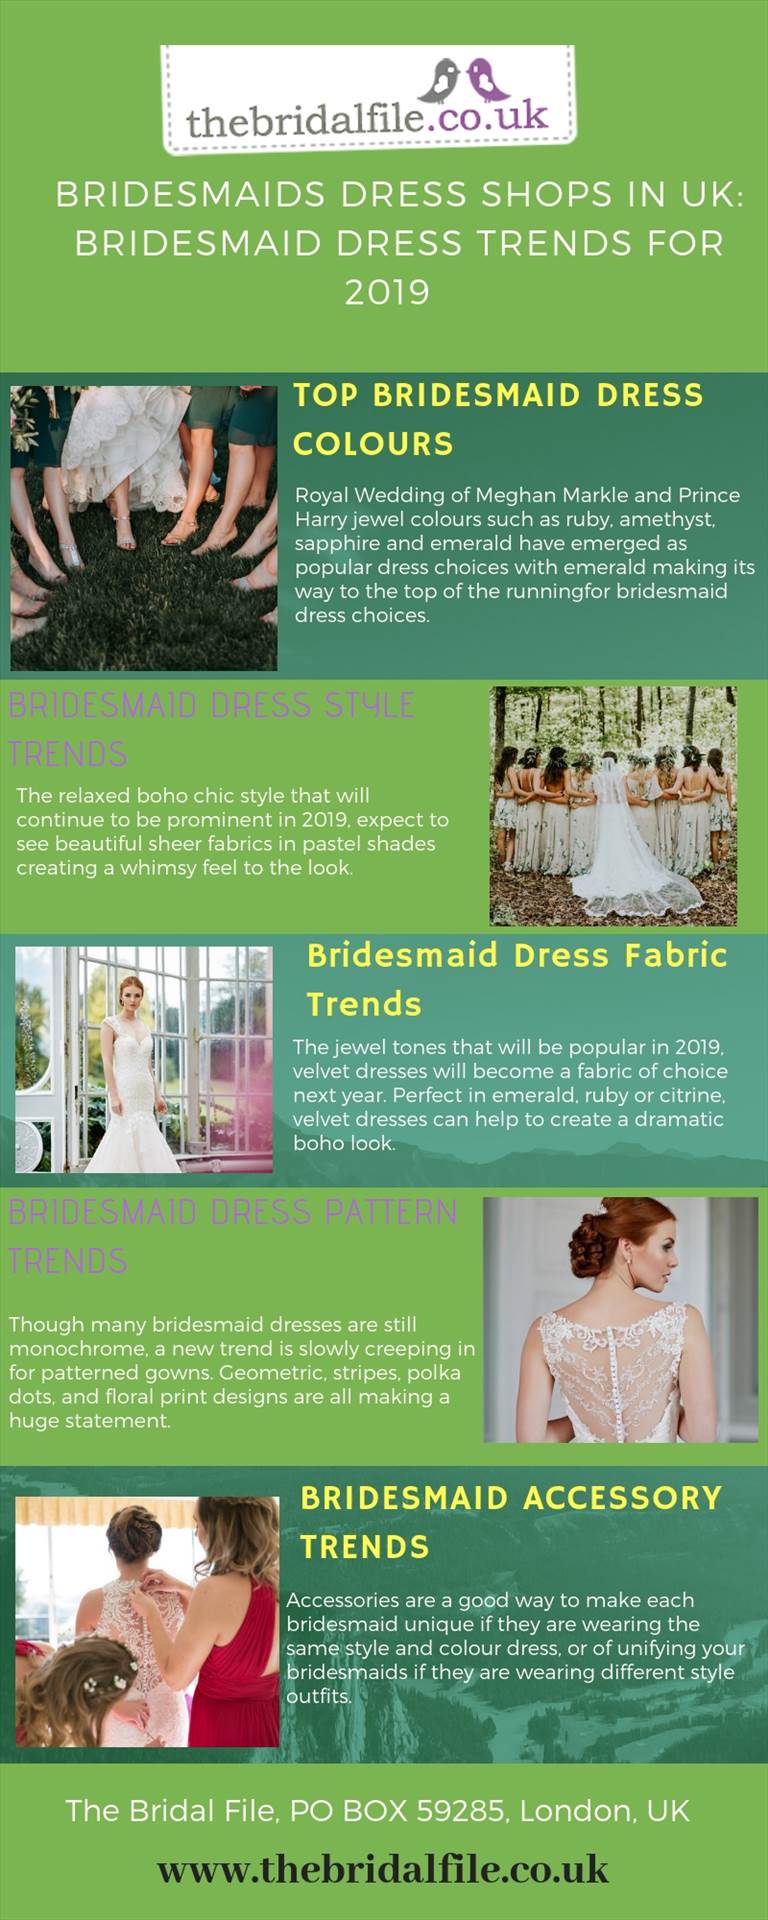 Bridesmaids Dress Shops in UK - Bridesmaid Dress Trends for 2019.jpg  by thebridalfile